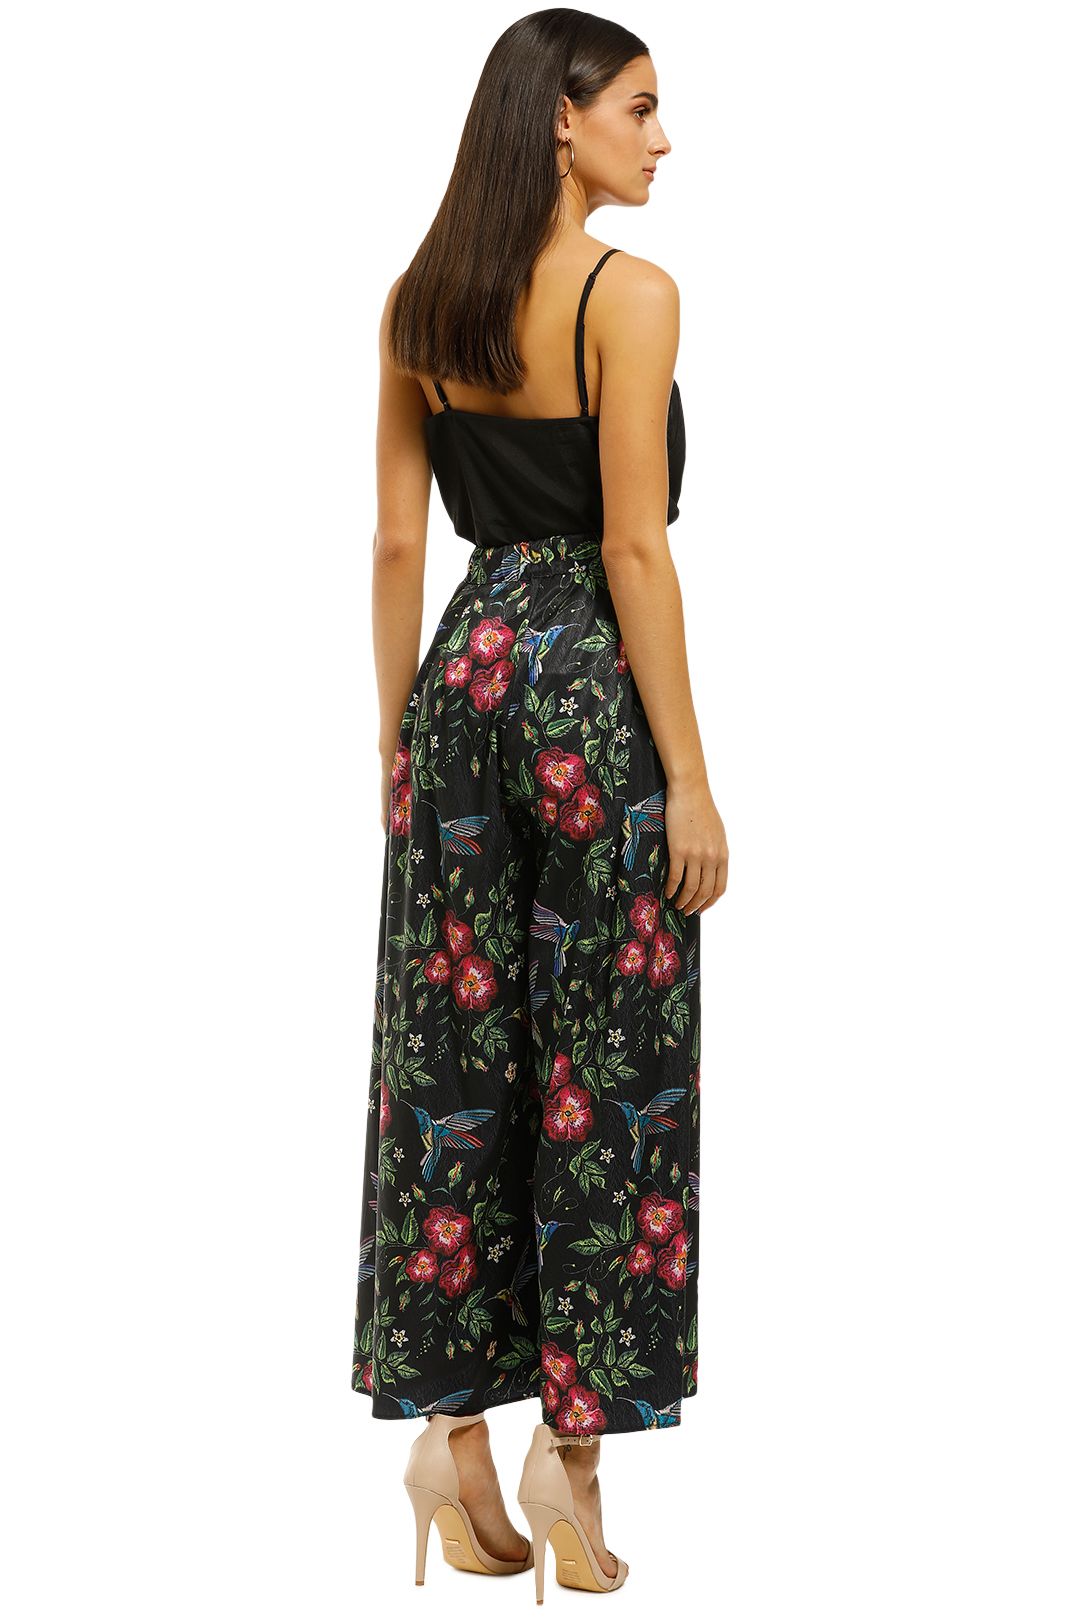 Curate-by-Trelise-Cooper-Not-For-Feather-Pant-Black-Floral-Back